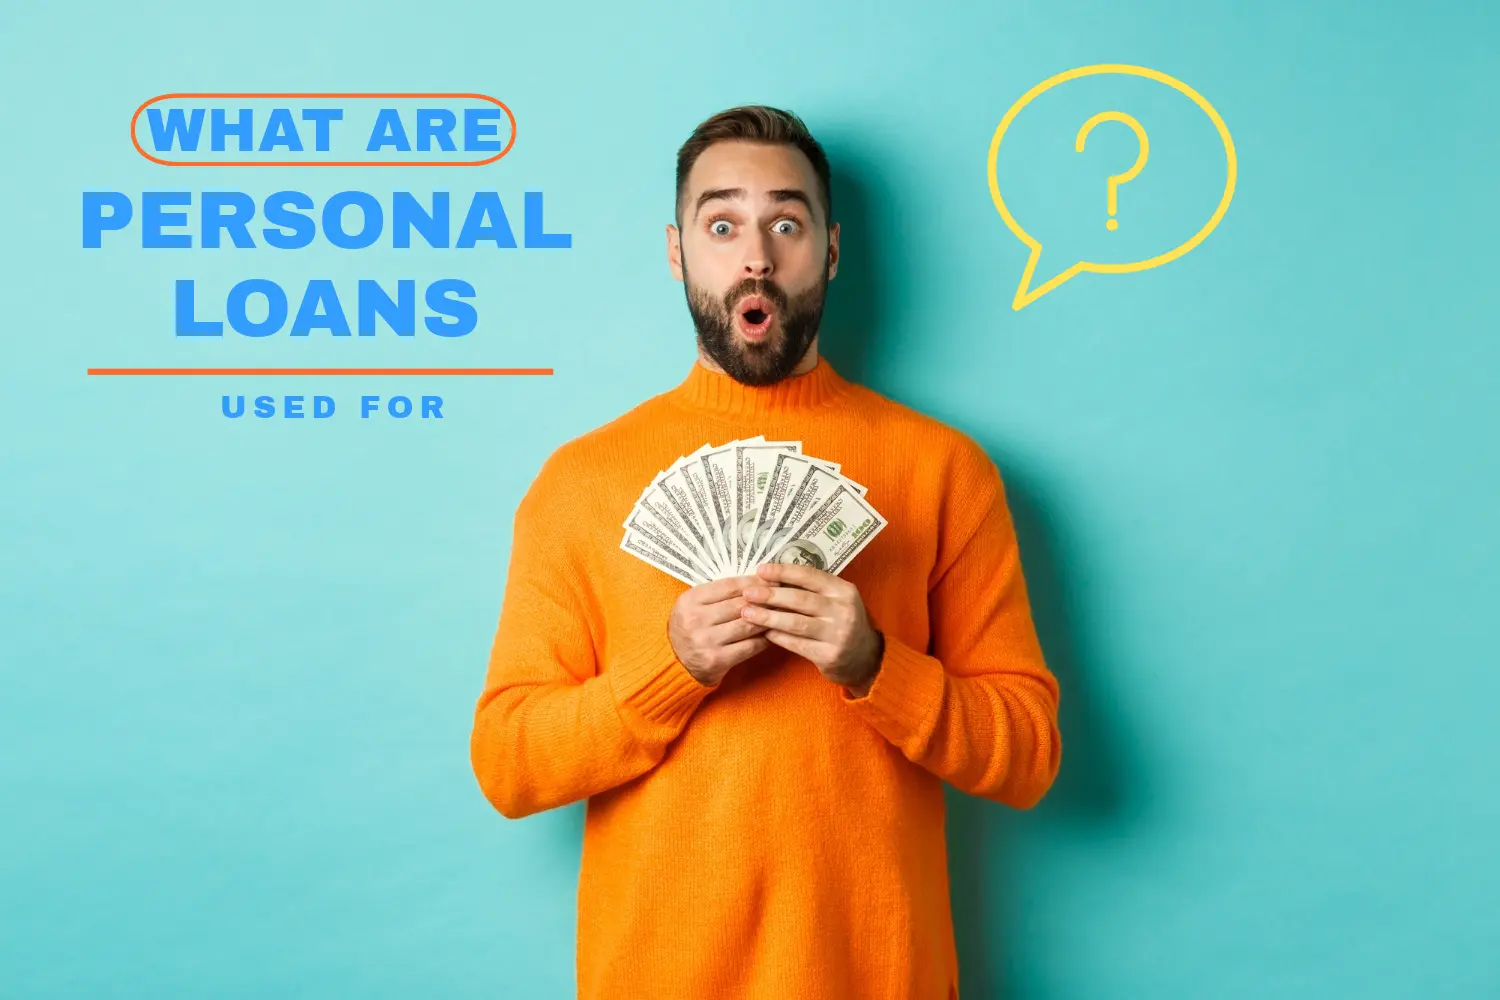 What Are Personal Loans Used For? The $1200 Loan Options